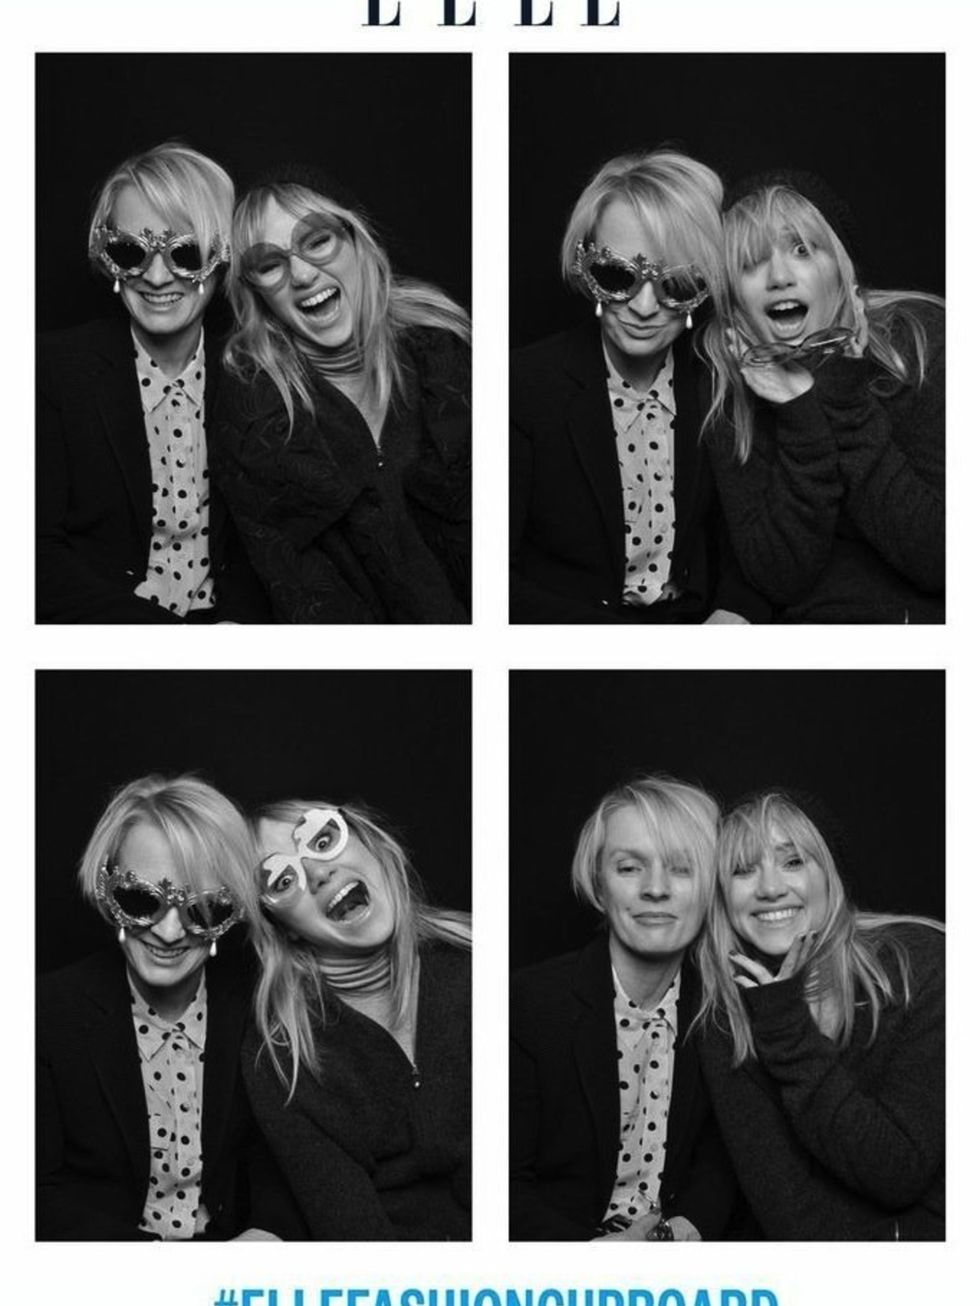 <p>Suki Waterhouse and Lorraine Candy in the ELLE photobooth</p>